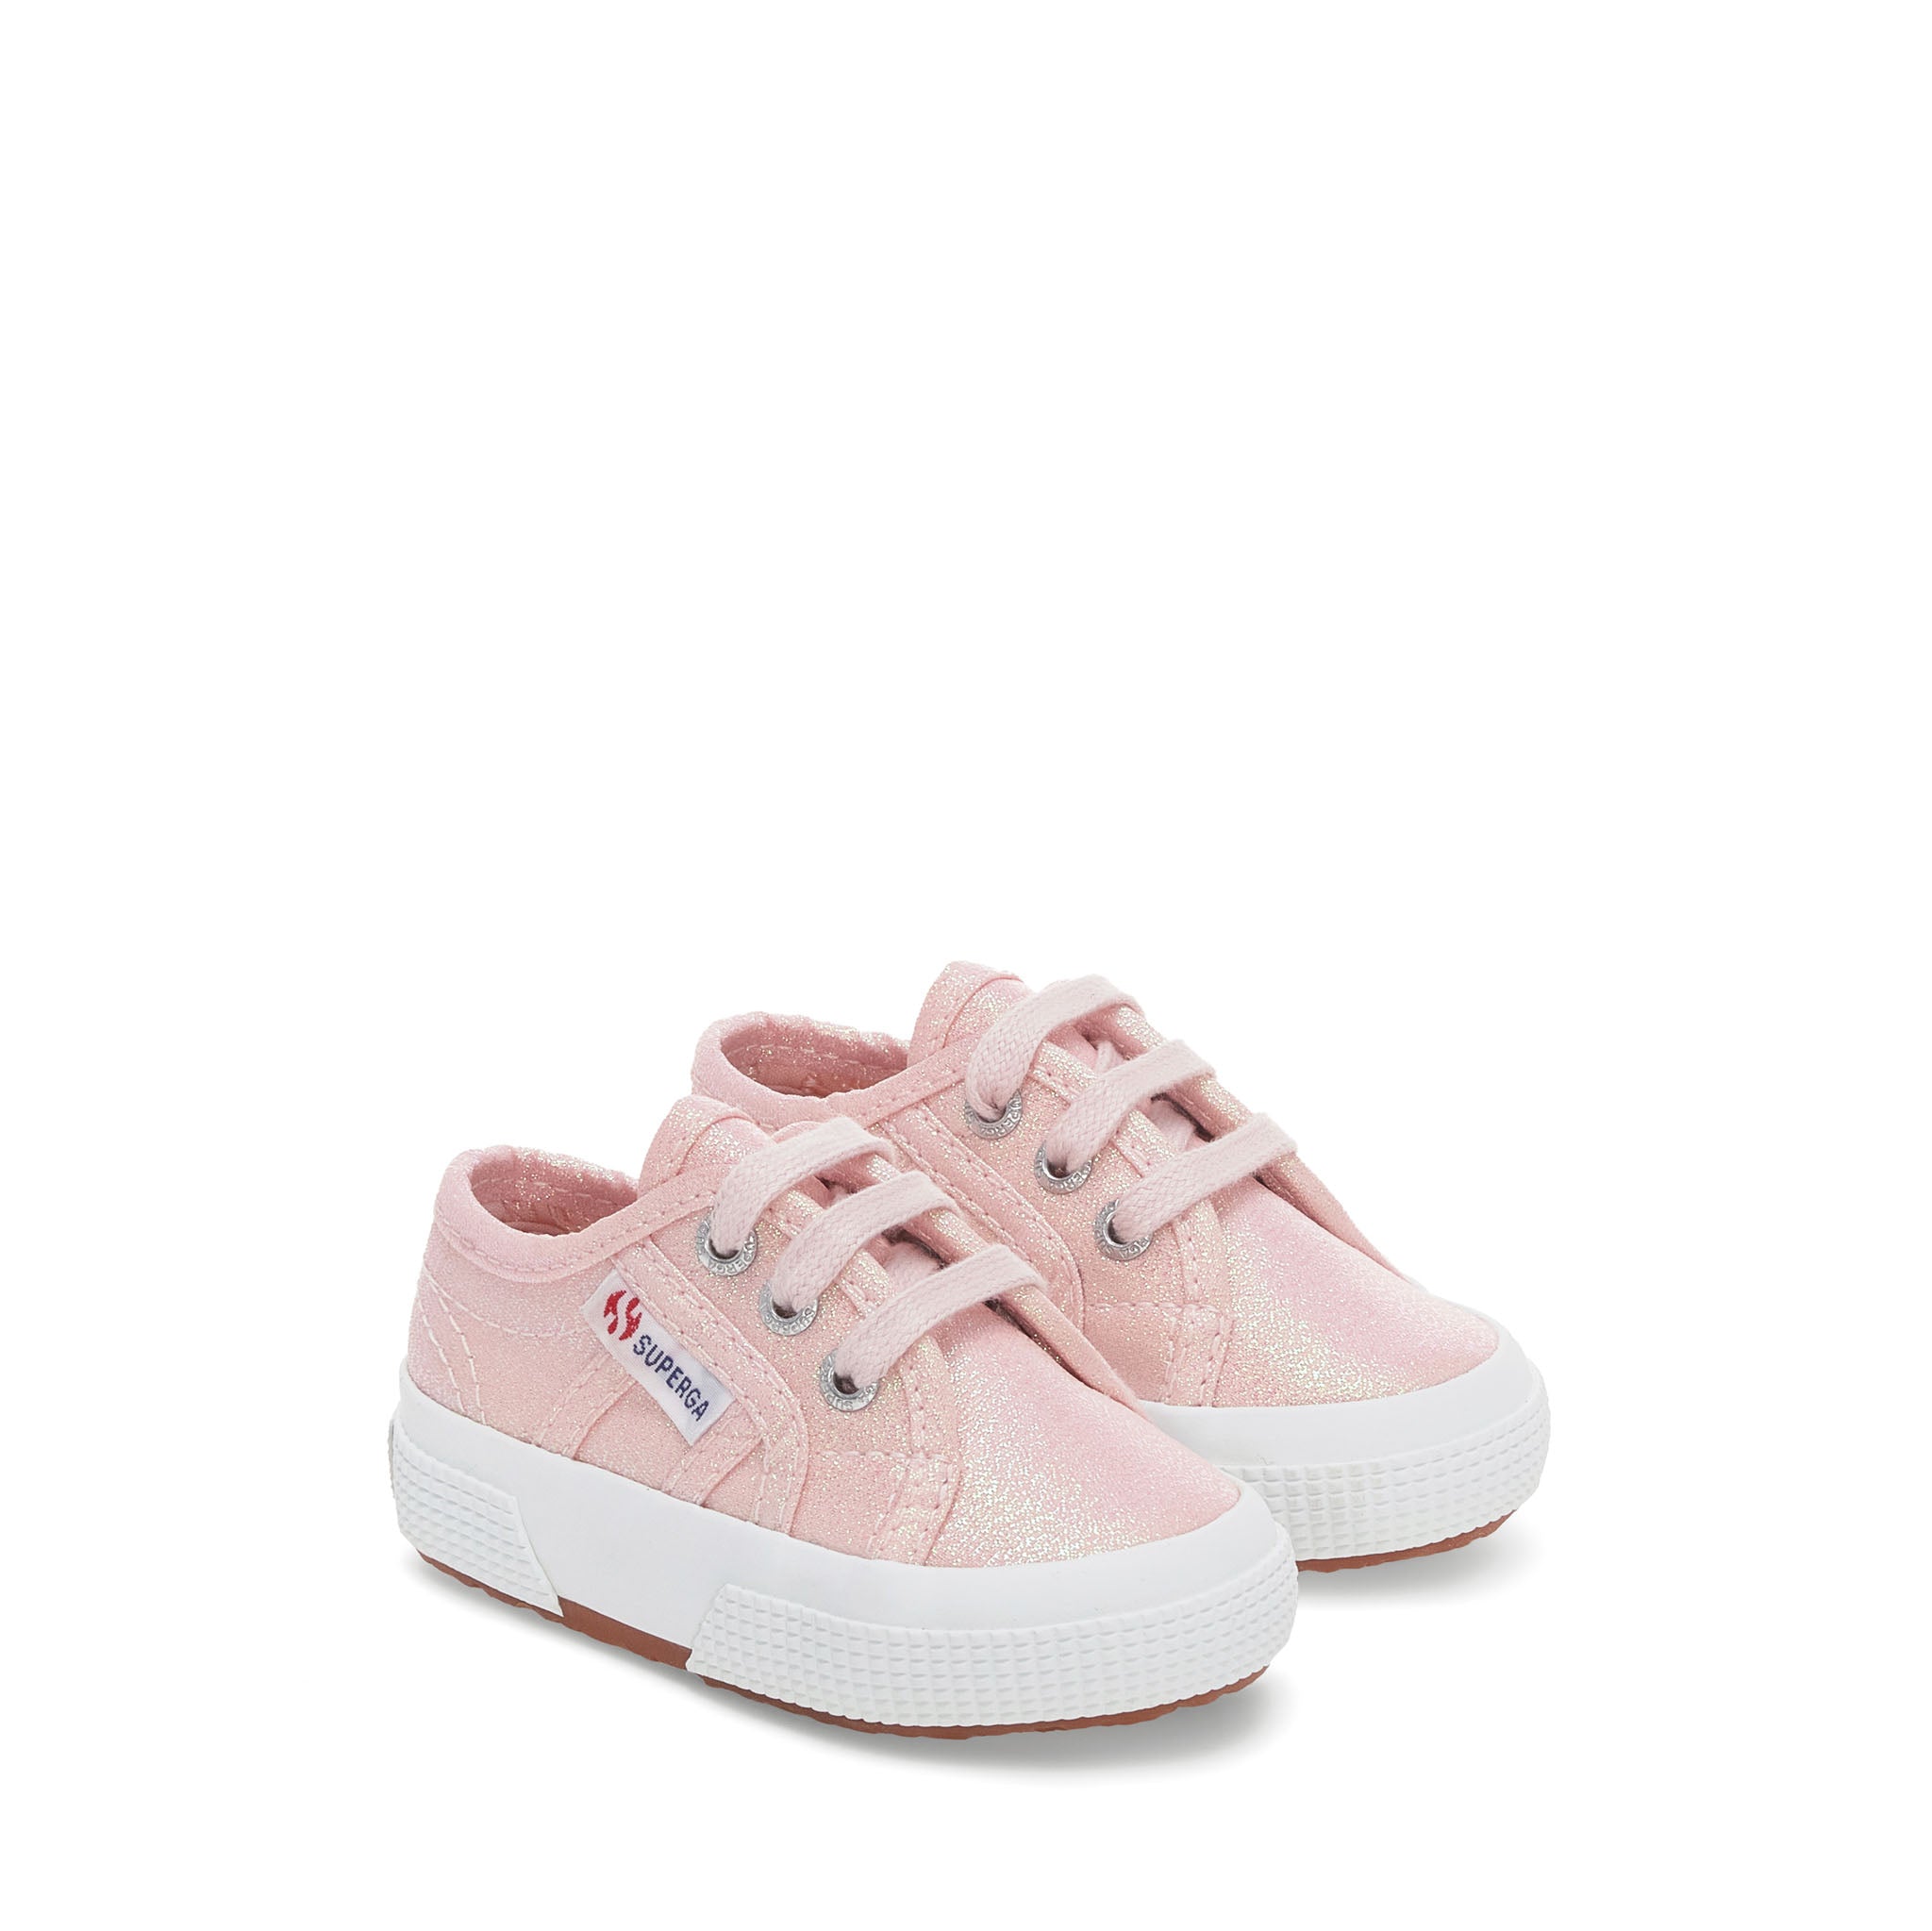 Superga 2750 Baby Lam√© Sneakers - Pinkish Iridescent. Front view.